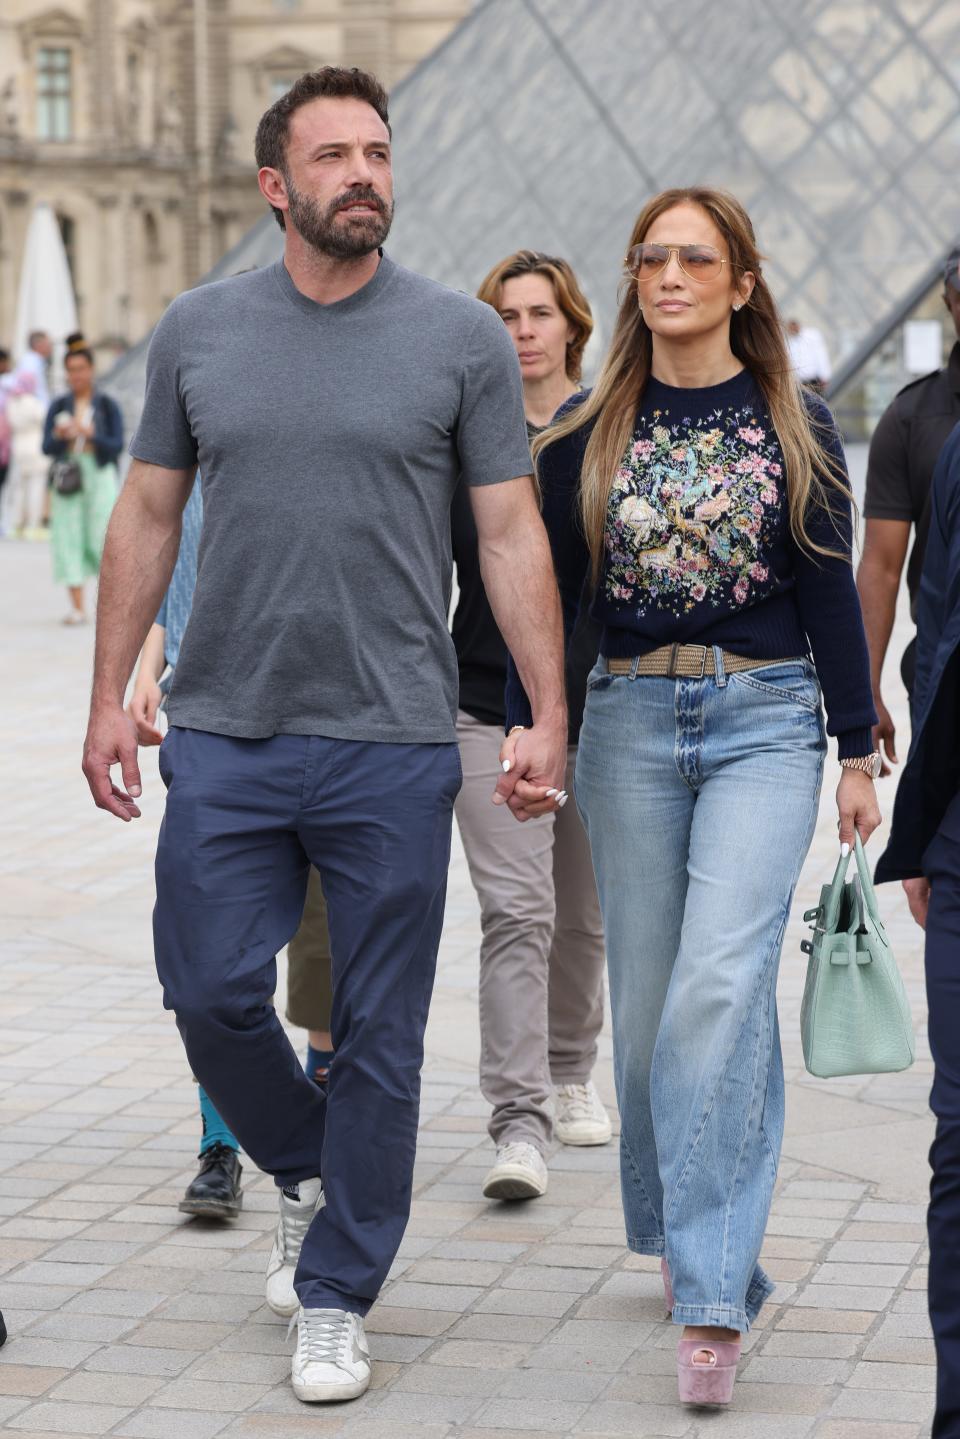 Jennifer Lopez and Ben Affleck at the Louvre Museum during their honeymoon in Paris, France.